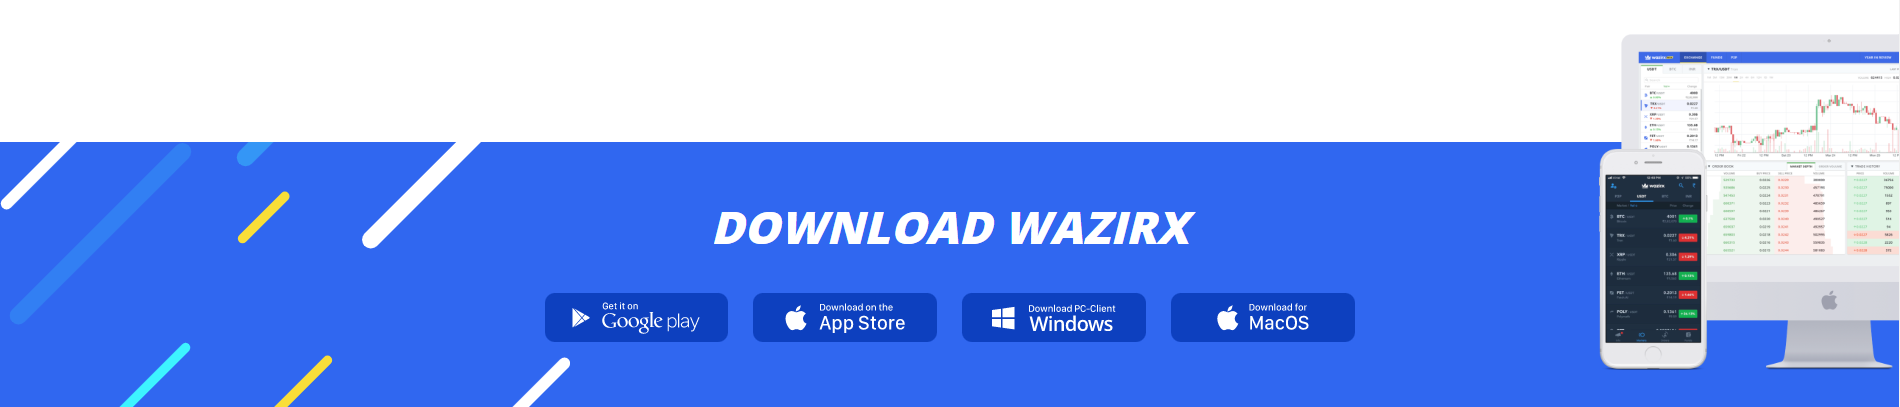 More about Trading on WazirX